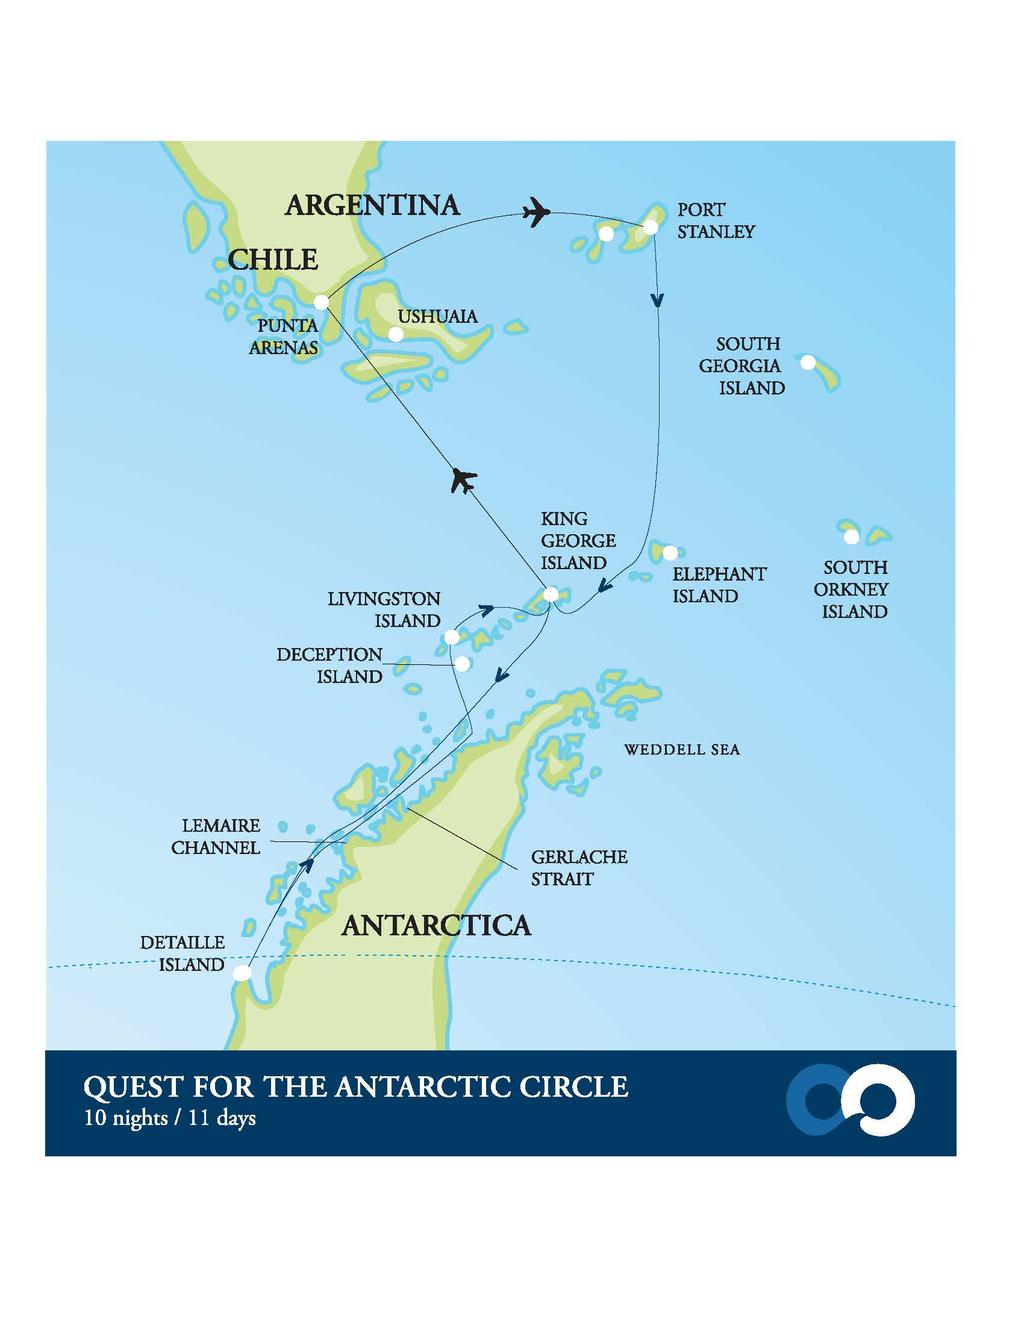 Utilizing our decades of experience exploring Antarctica, we have designed a new voyage allowing us to reach our objective of the Antarctic Circle in just 11 days.